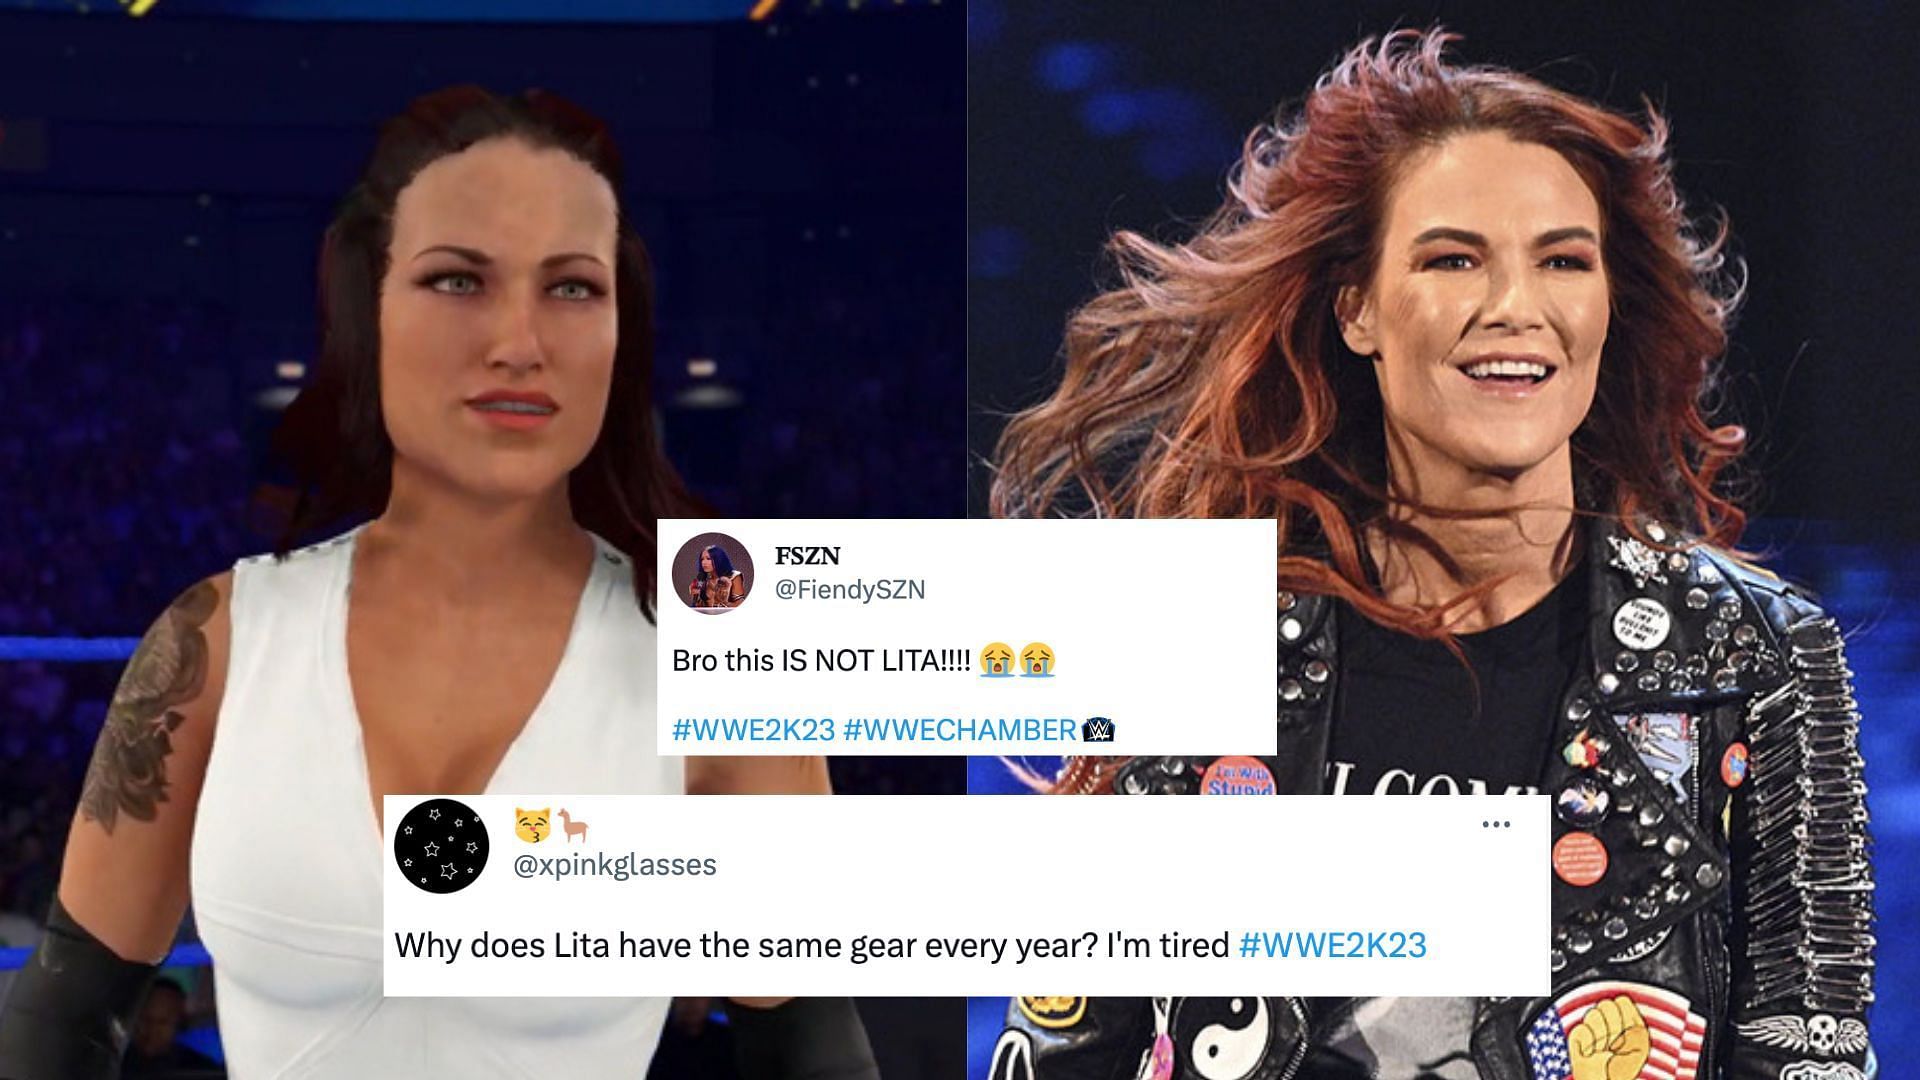 Lita will be a playable character in WWE 2K23.